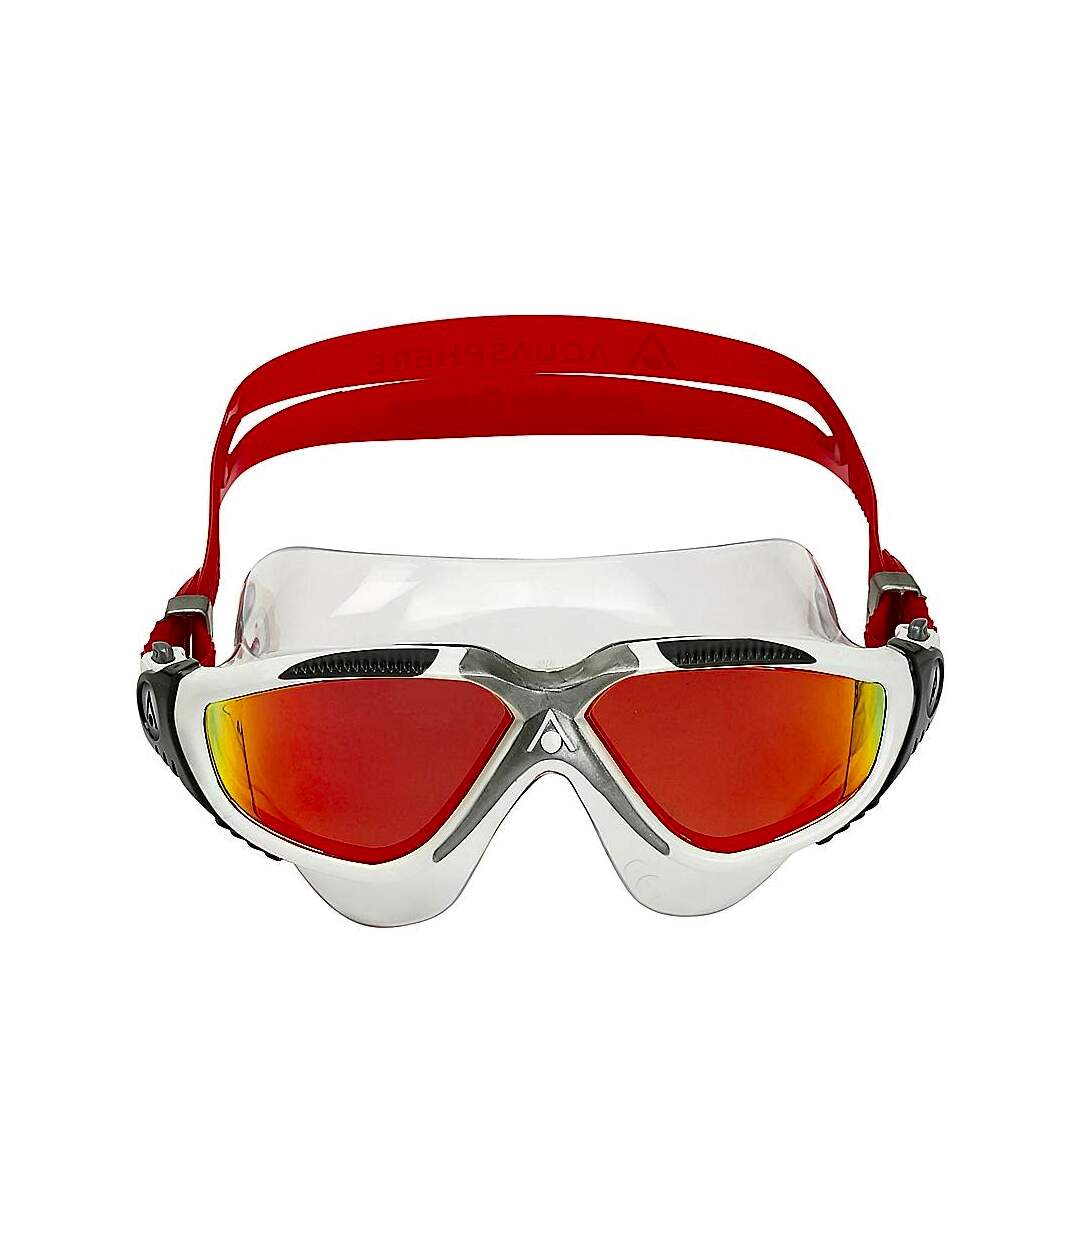 Aquasphere Unisex Adult Vista Mirrored Swimming Goggles (White/Silver/Red)